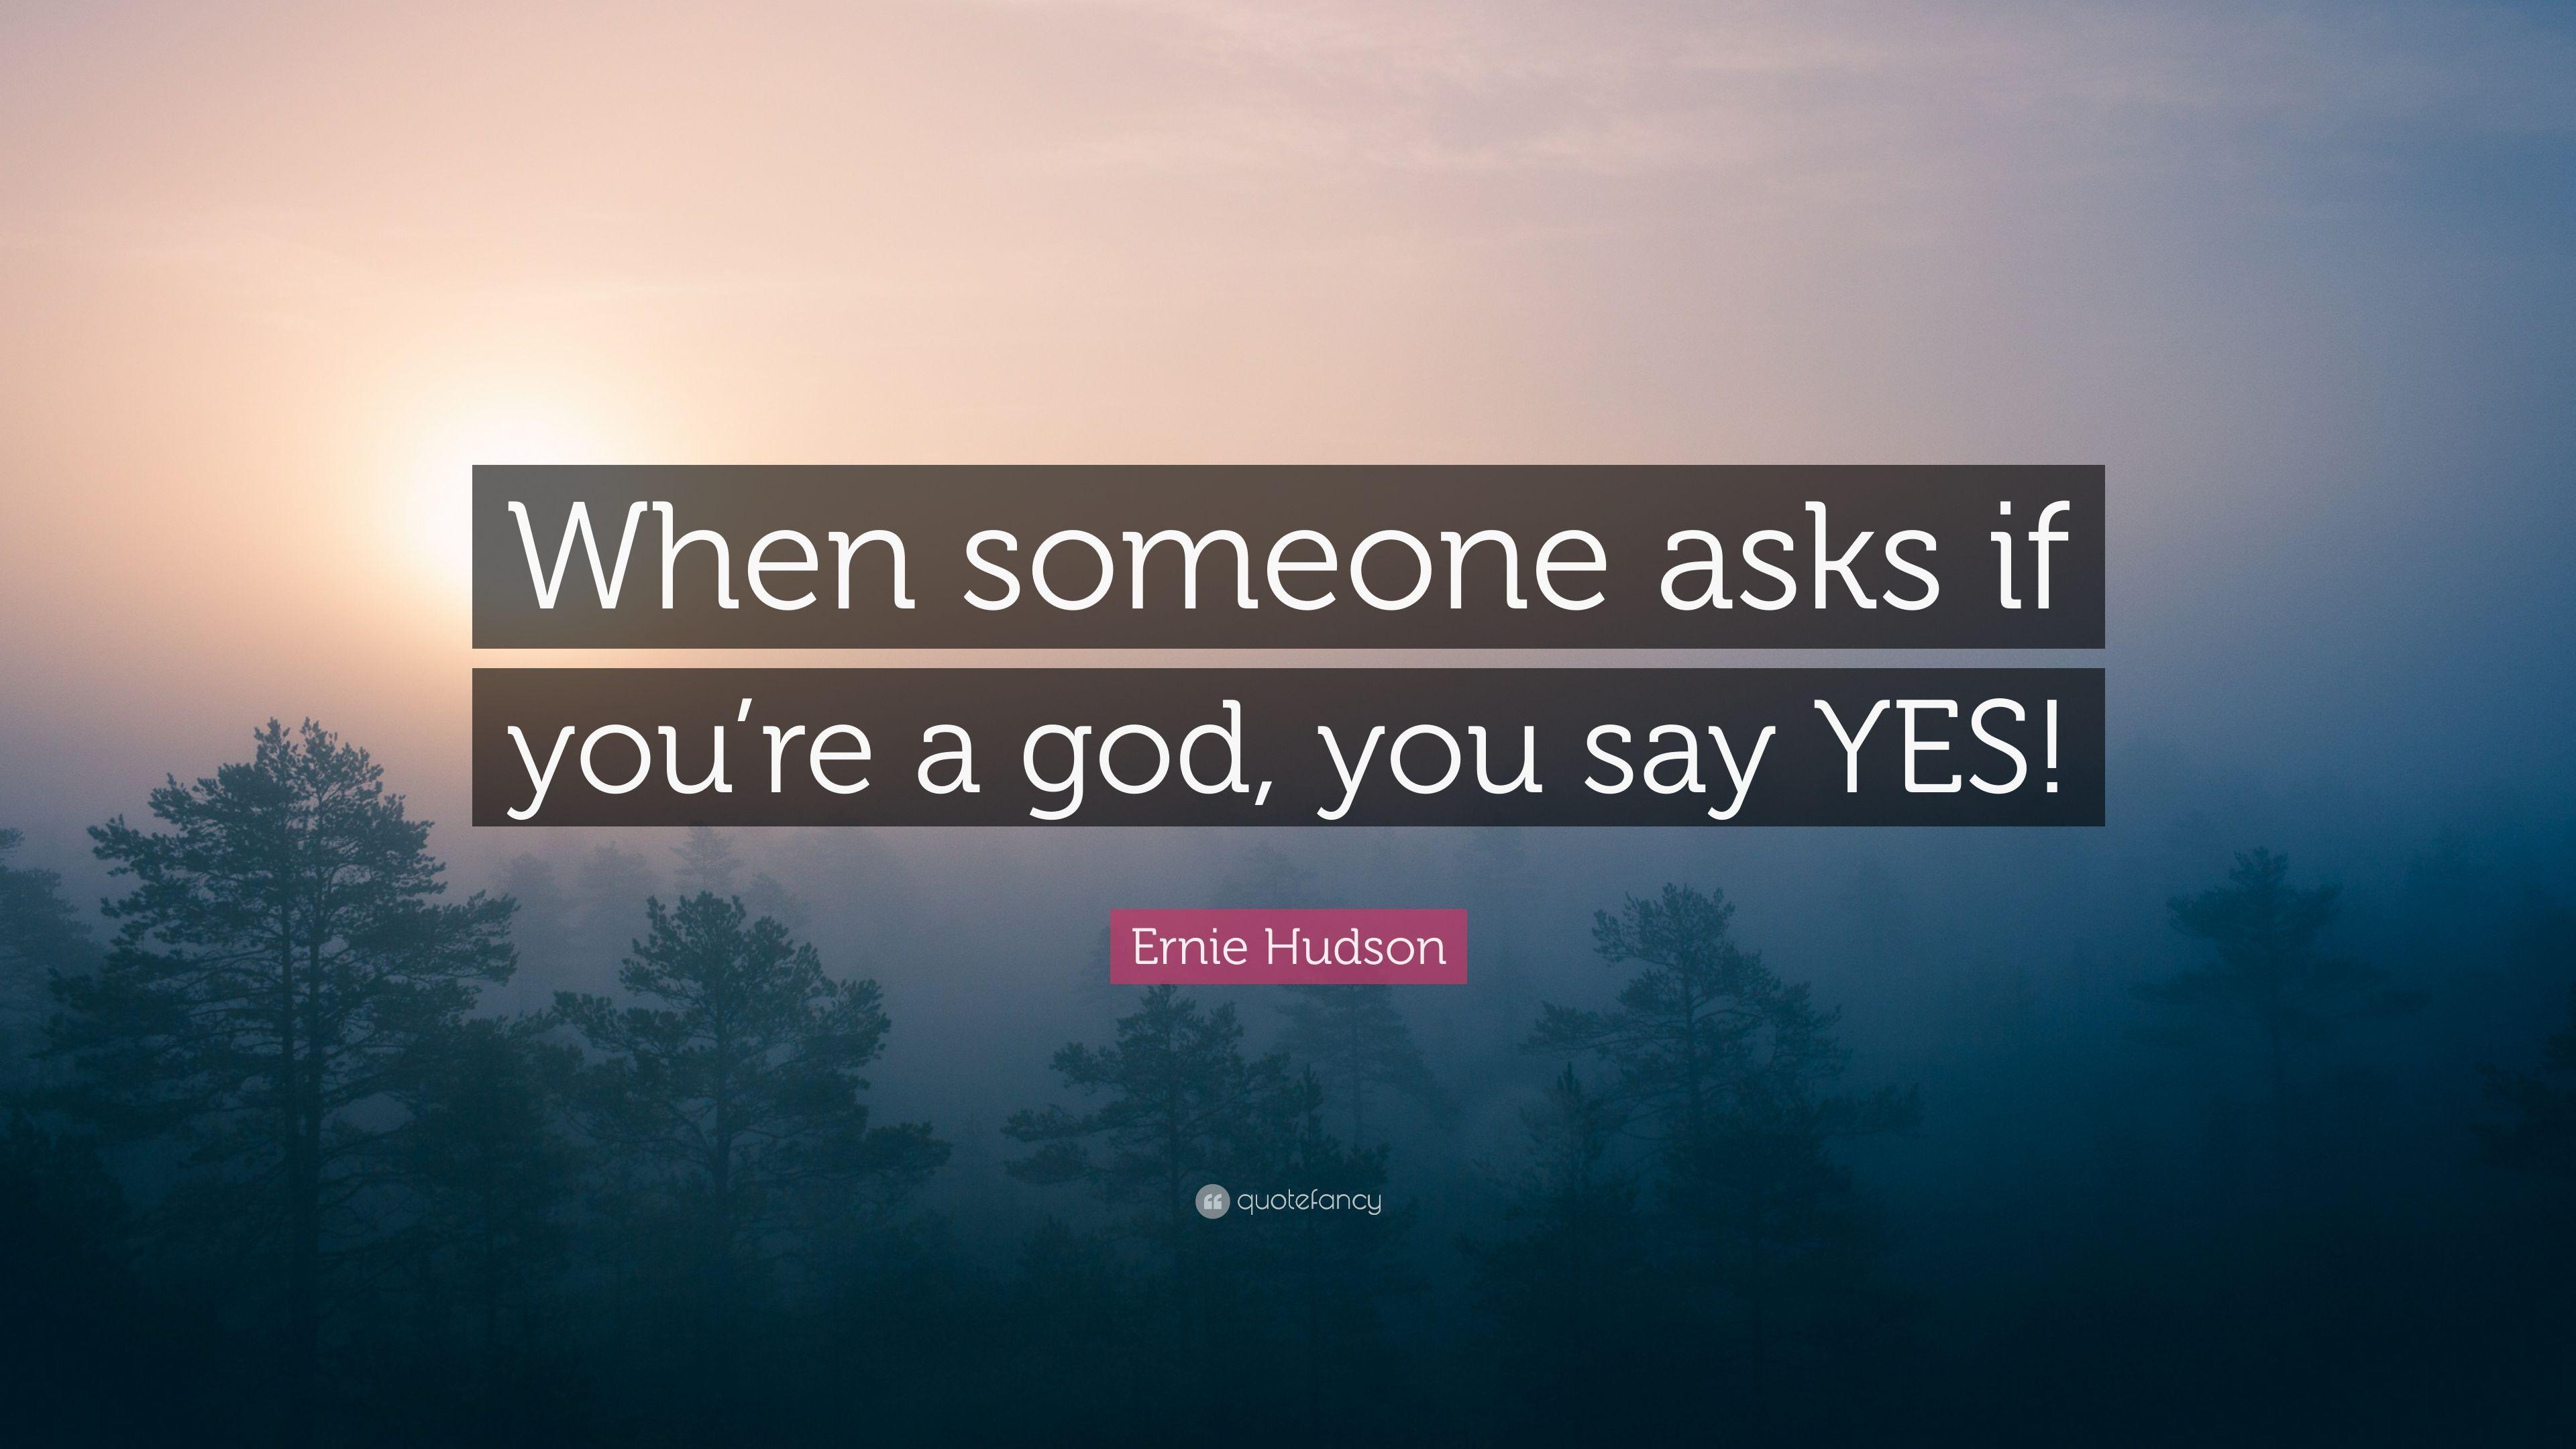 Ernie Hudson Quote: “When someone asks if you're a god, you say